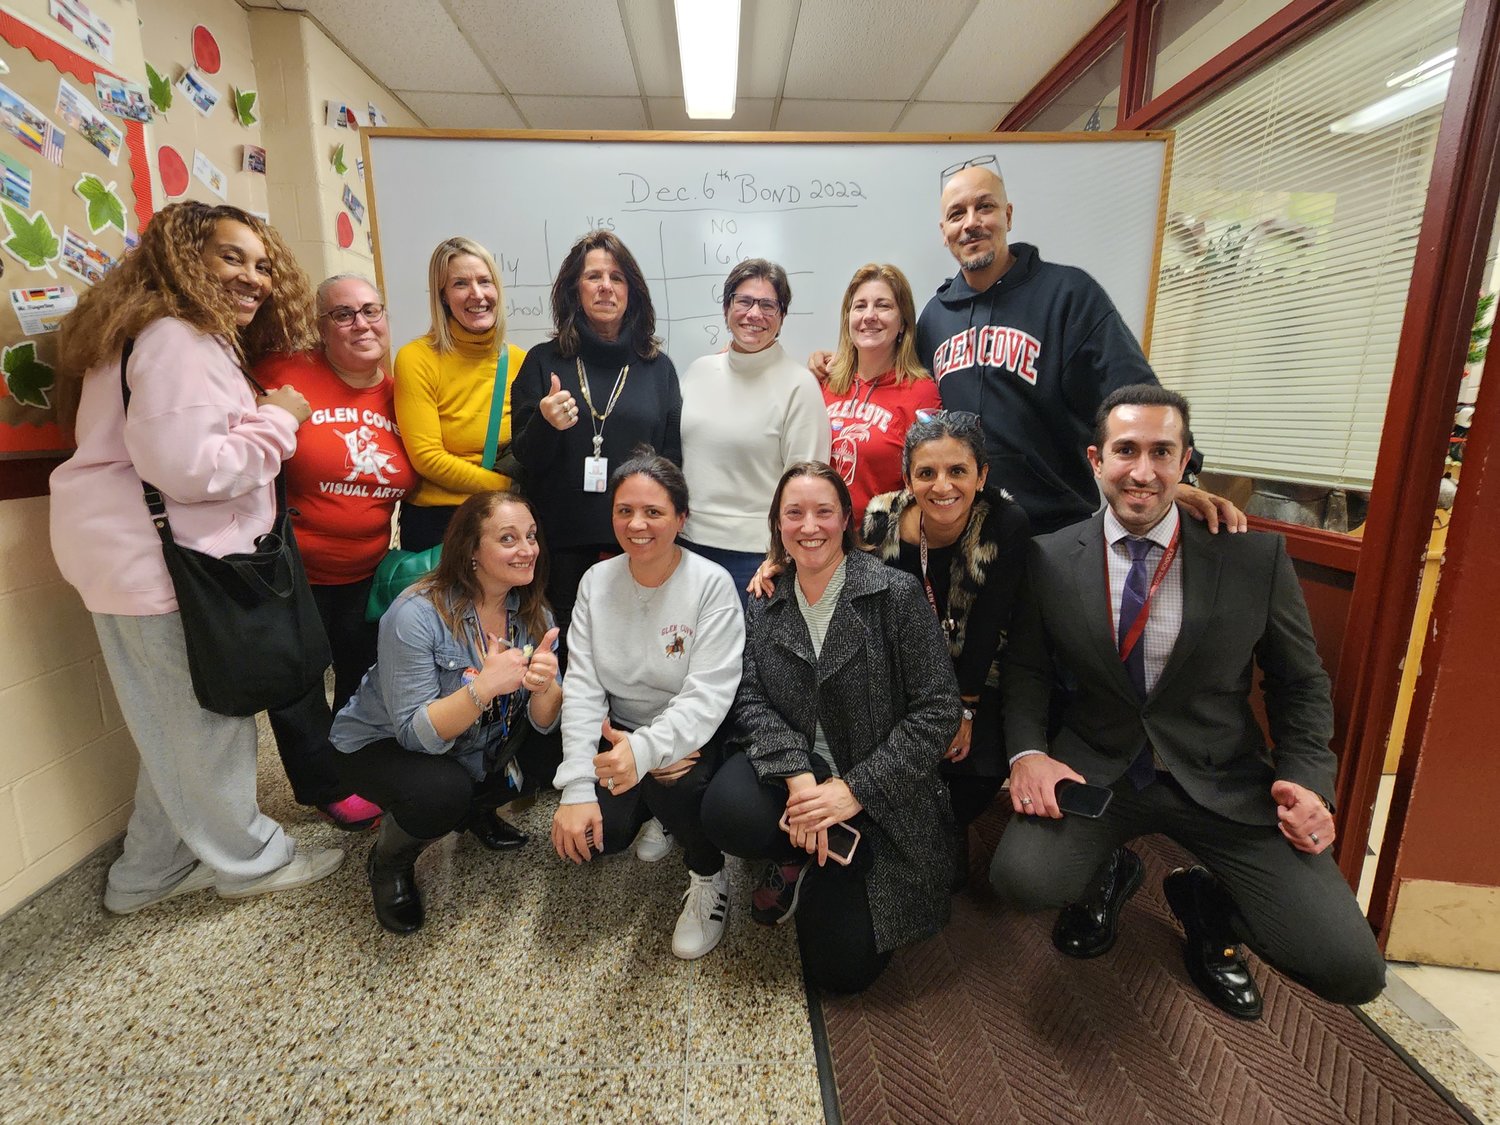 After tears of joy and many hugs, Board of Education members and school officials gathered to celebrate the results of the 2022 bond referendum, which will provide nearly $31 million to the Glen Cove City School District.